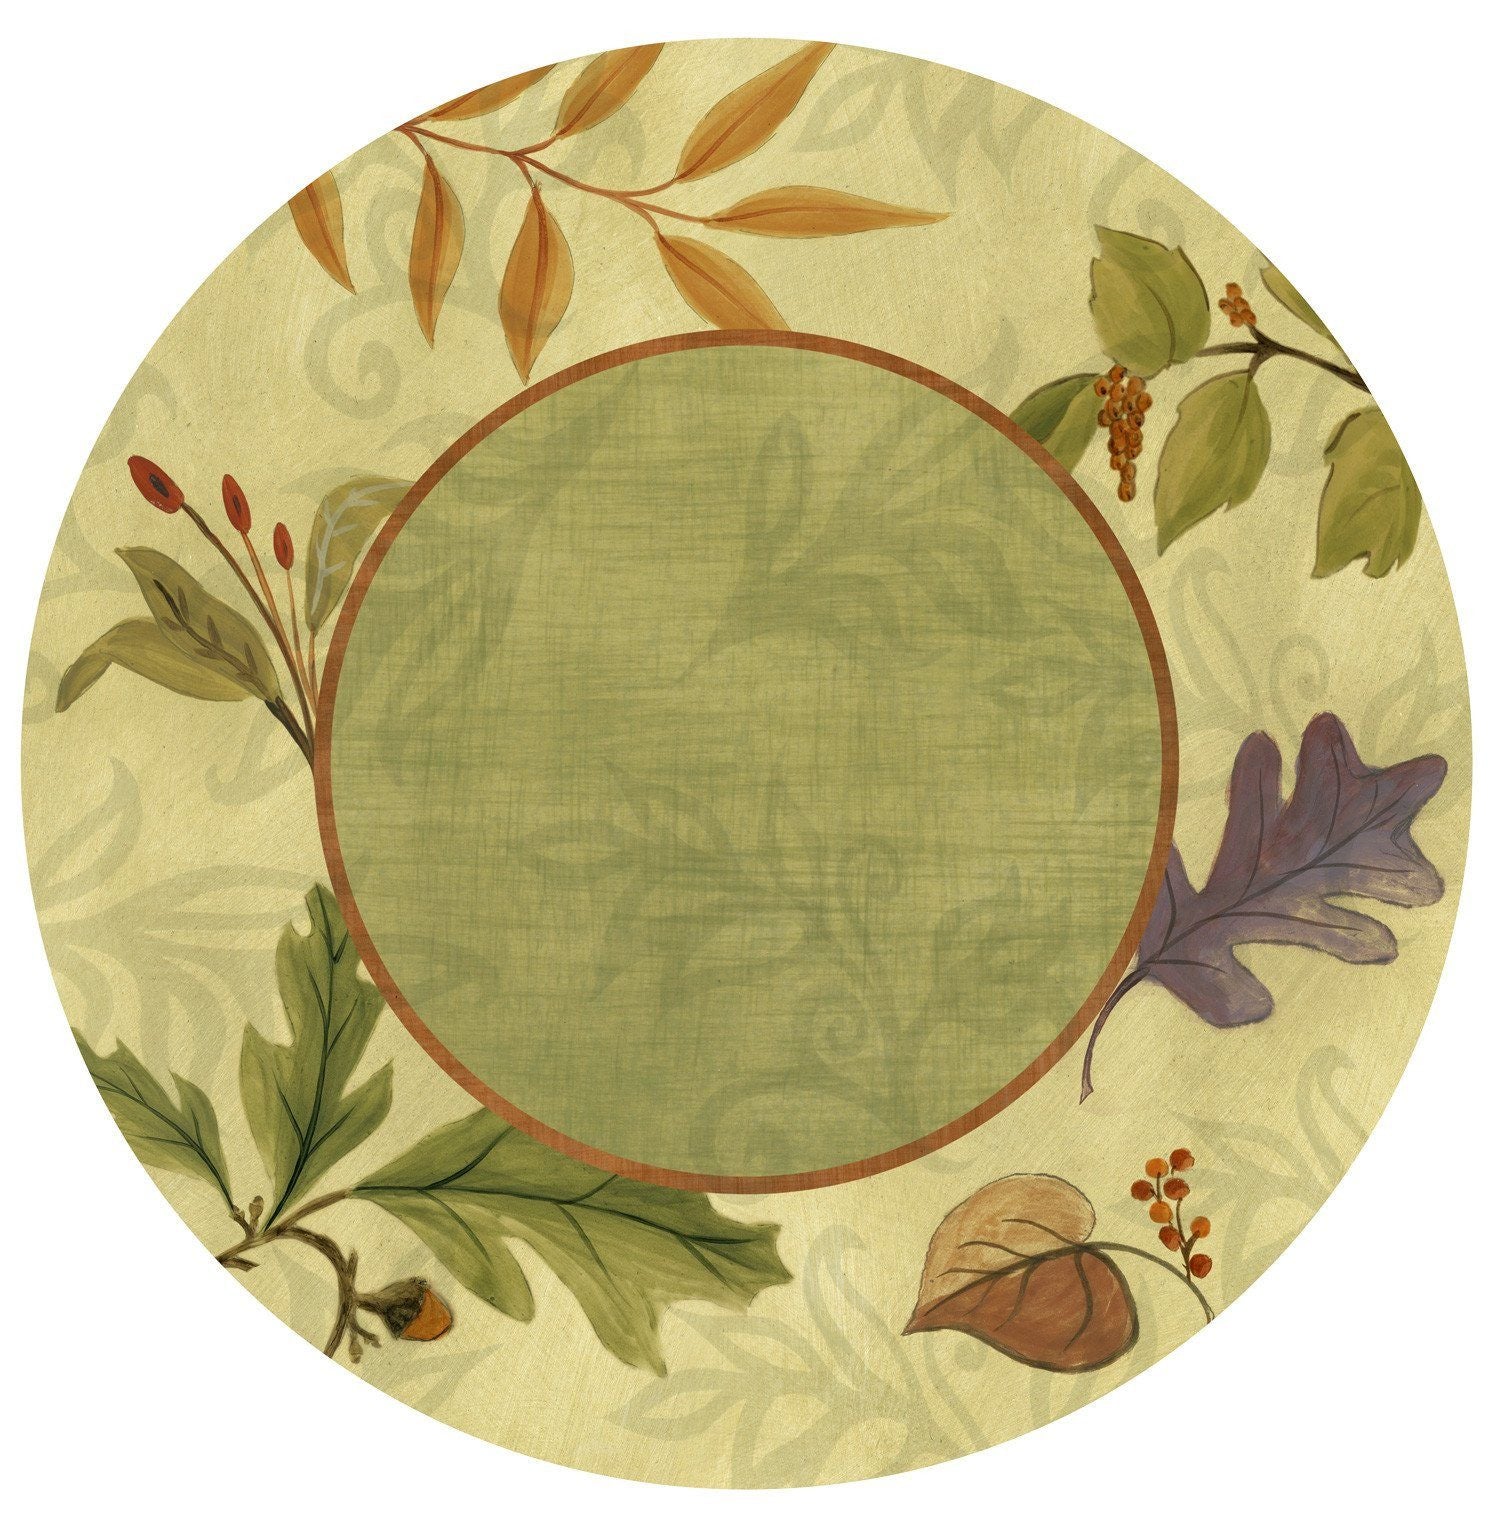 Janna Ugone & Co Lazy Susan Small Lazy Susan in Forest Leaves